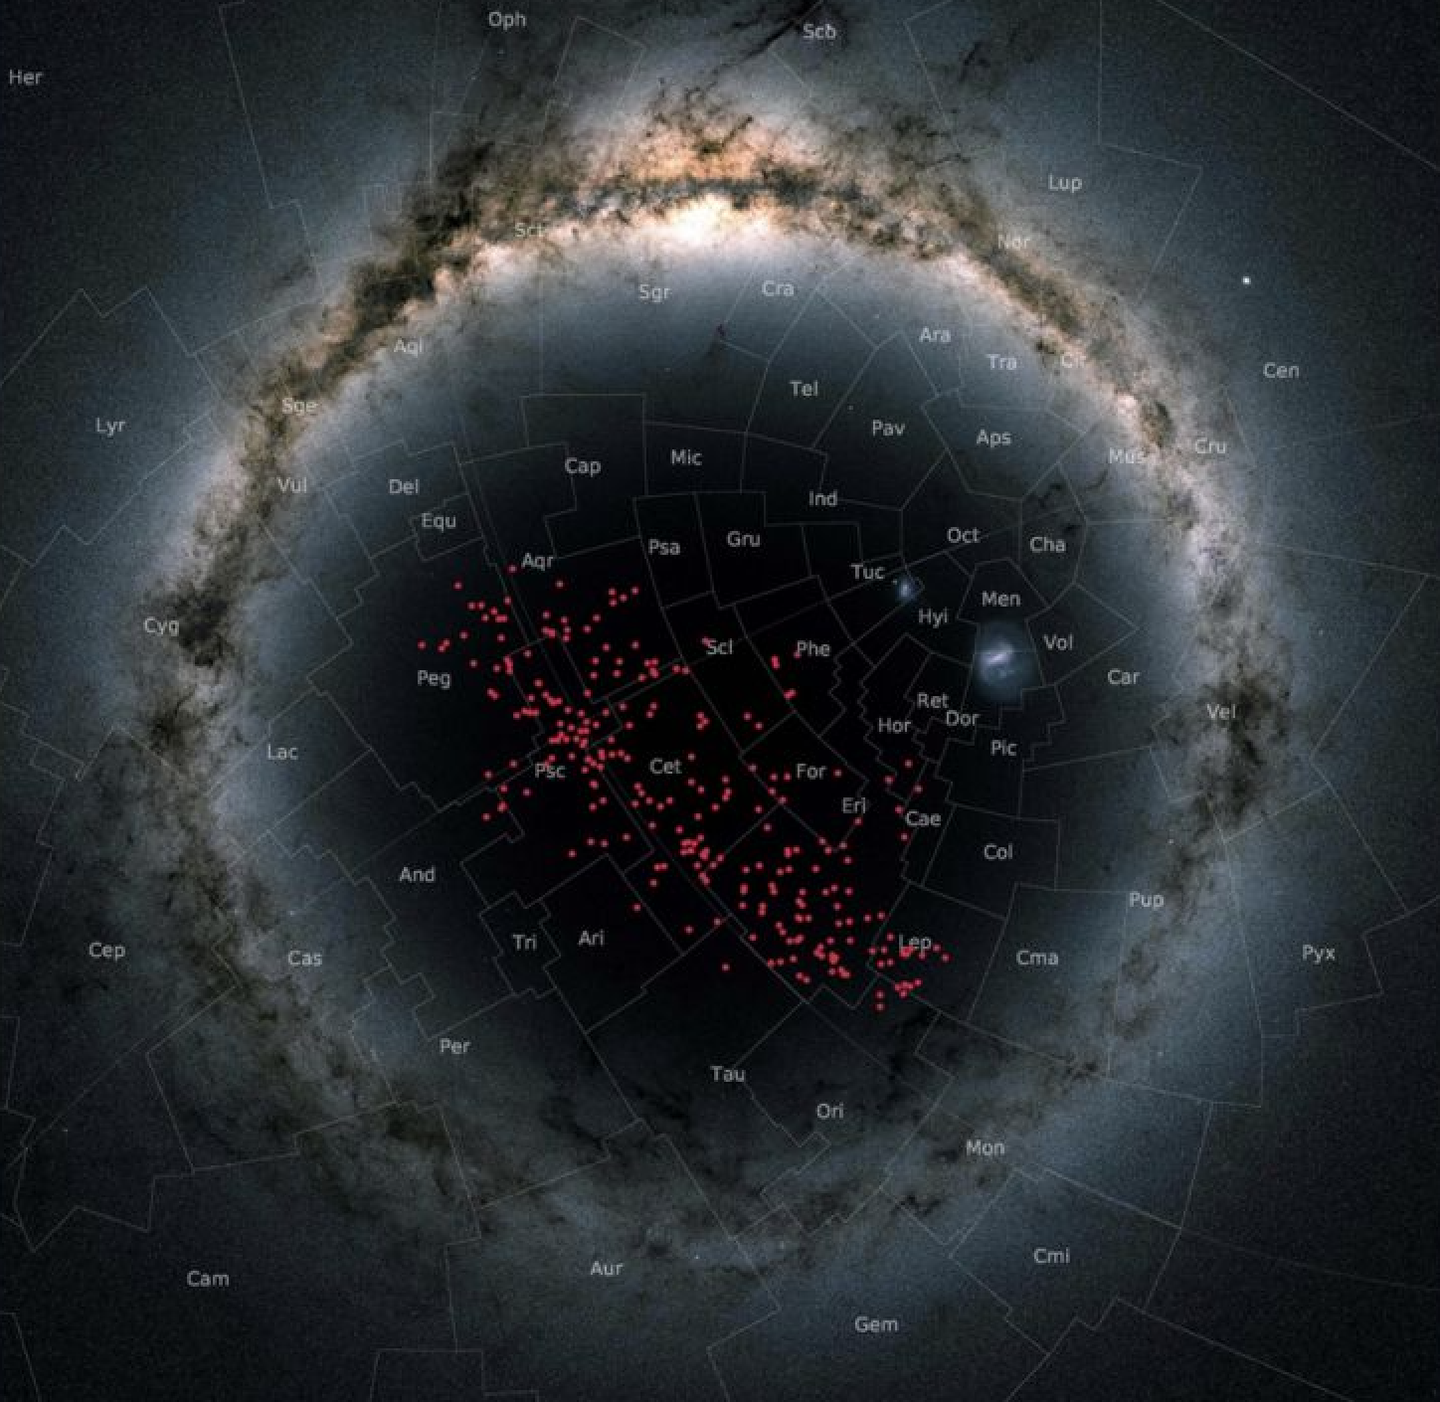 River of stars map galaxy Gaia discovery